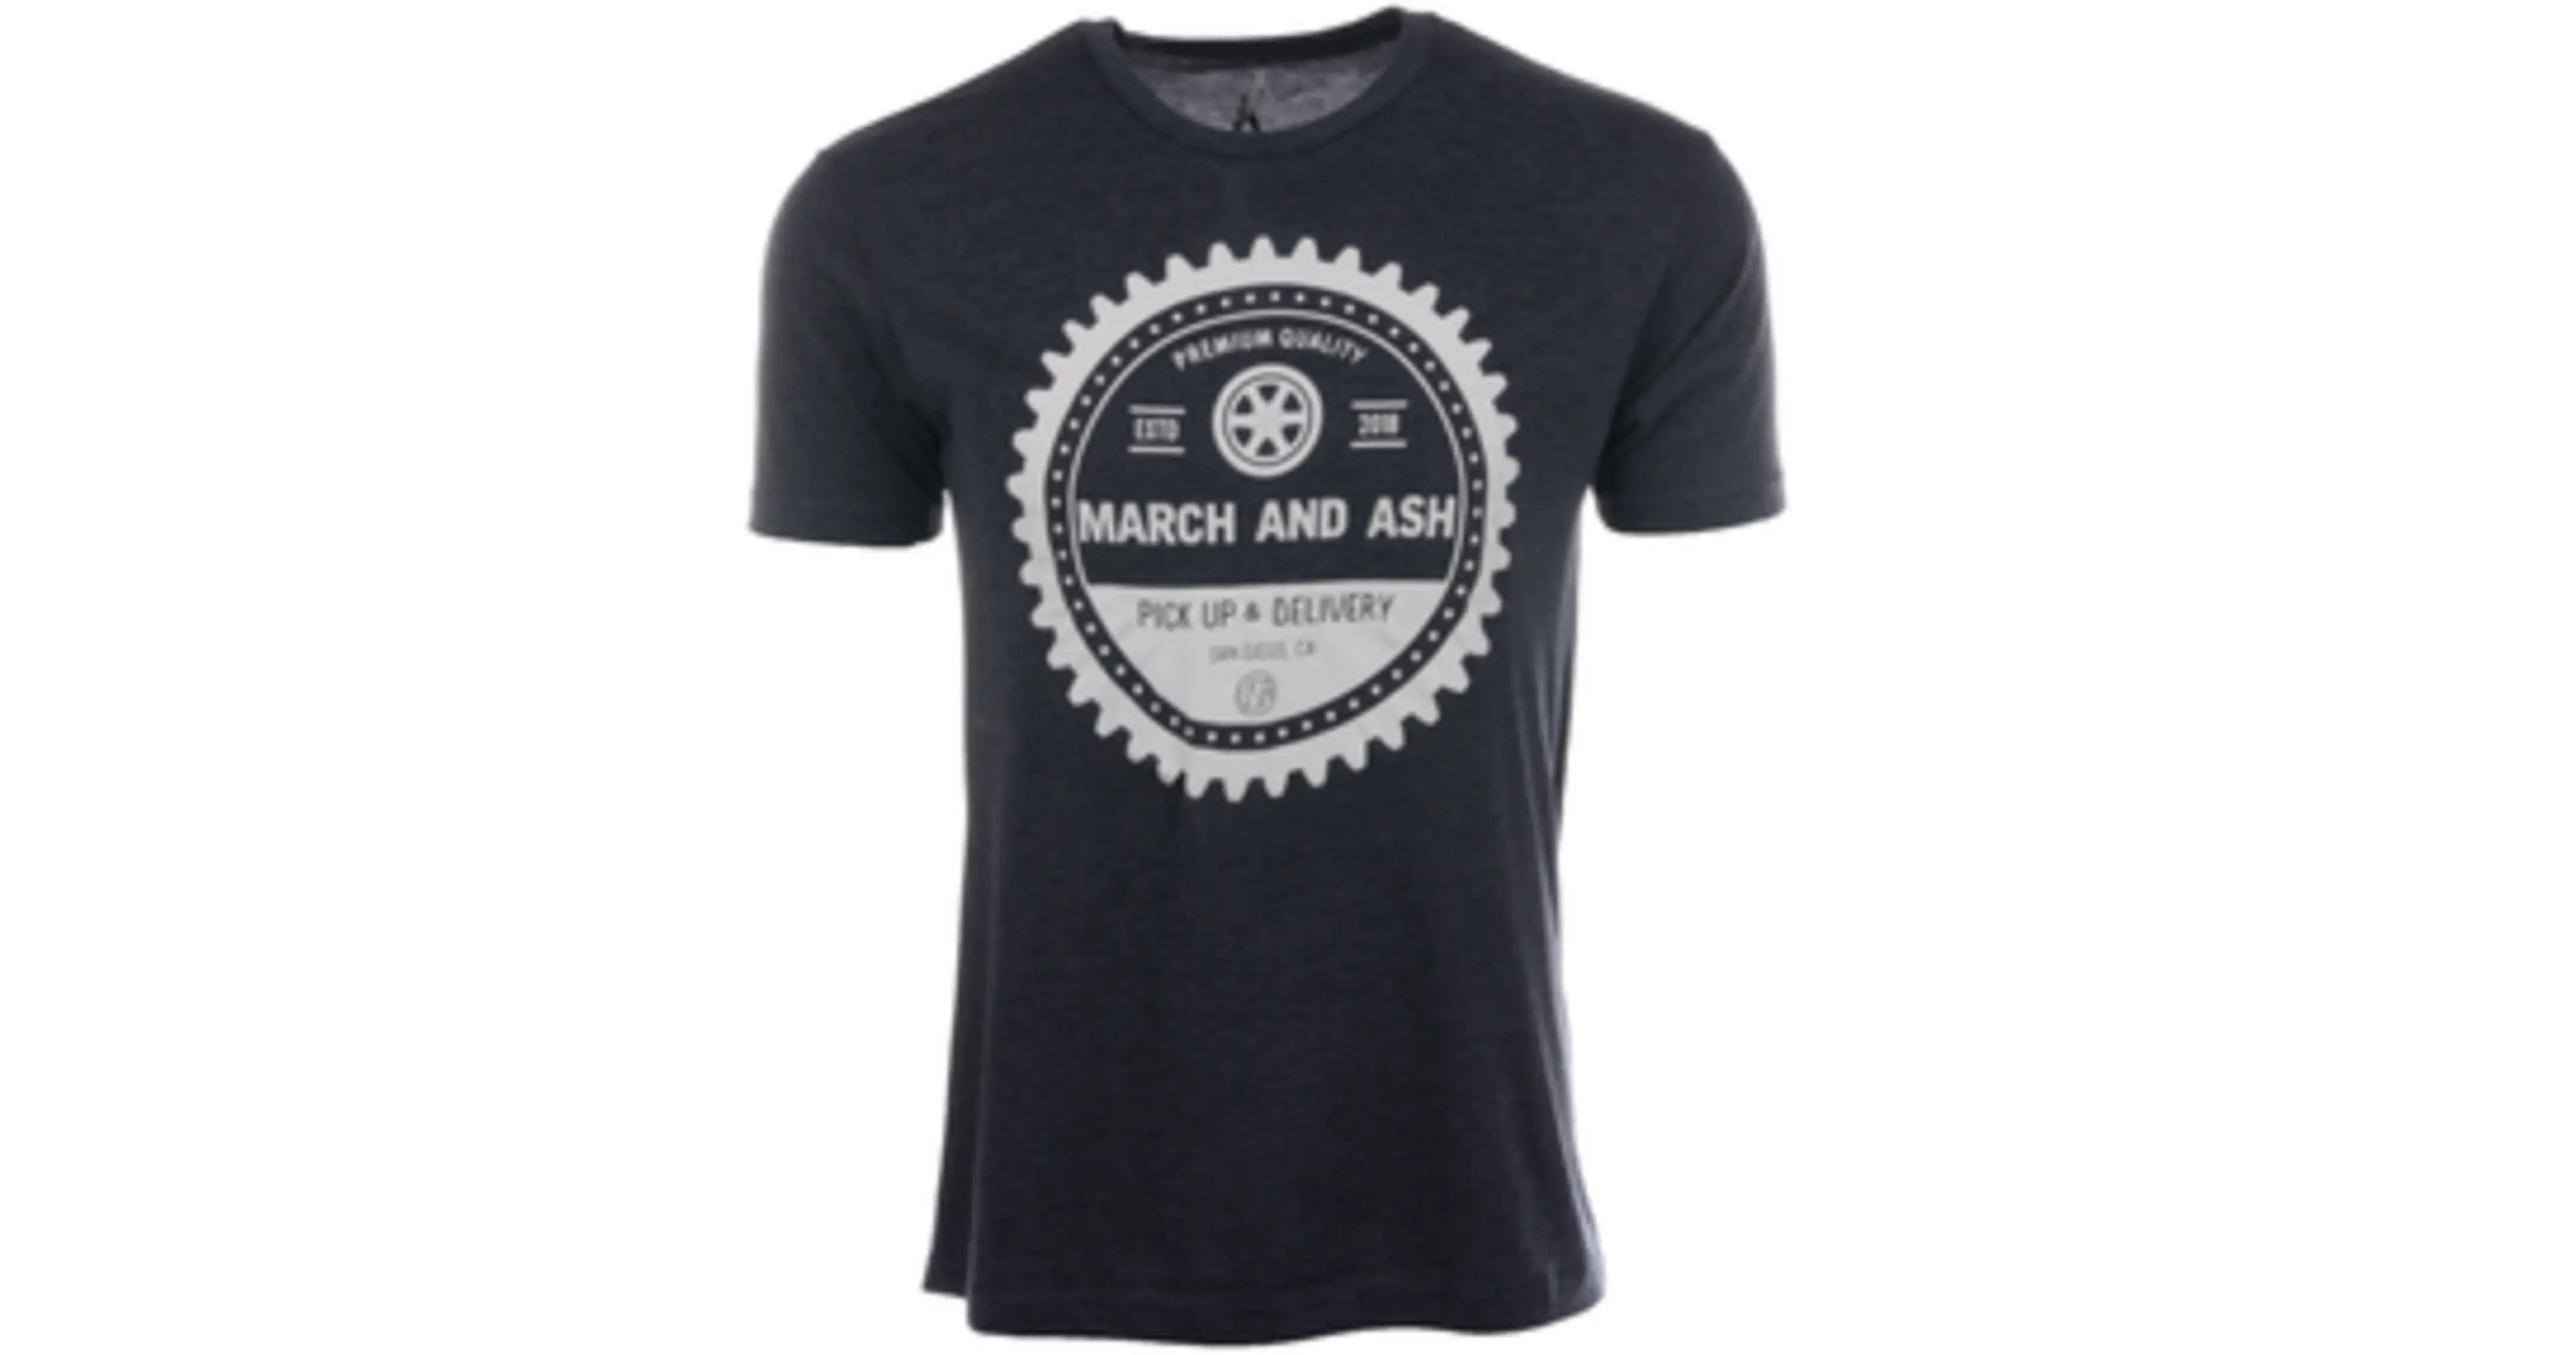 Unisex Navy Vintage March and Ash Gear Tee